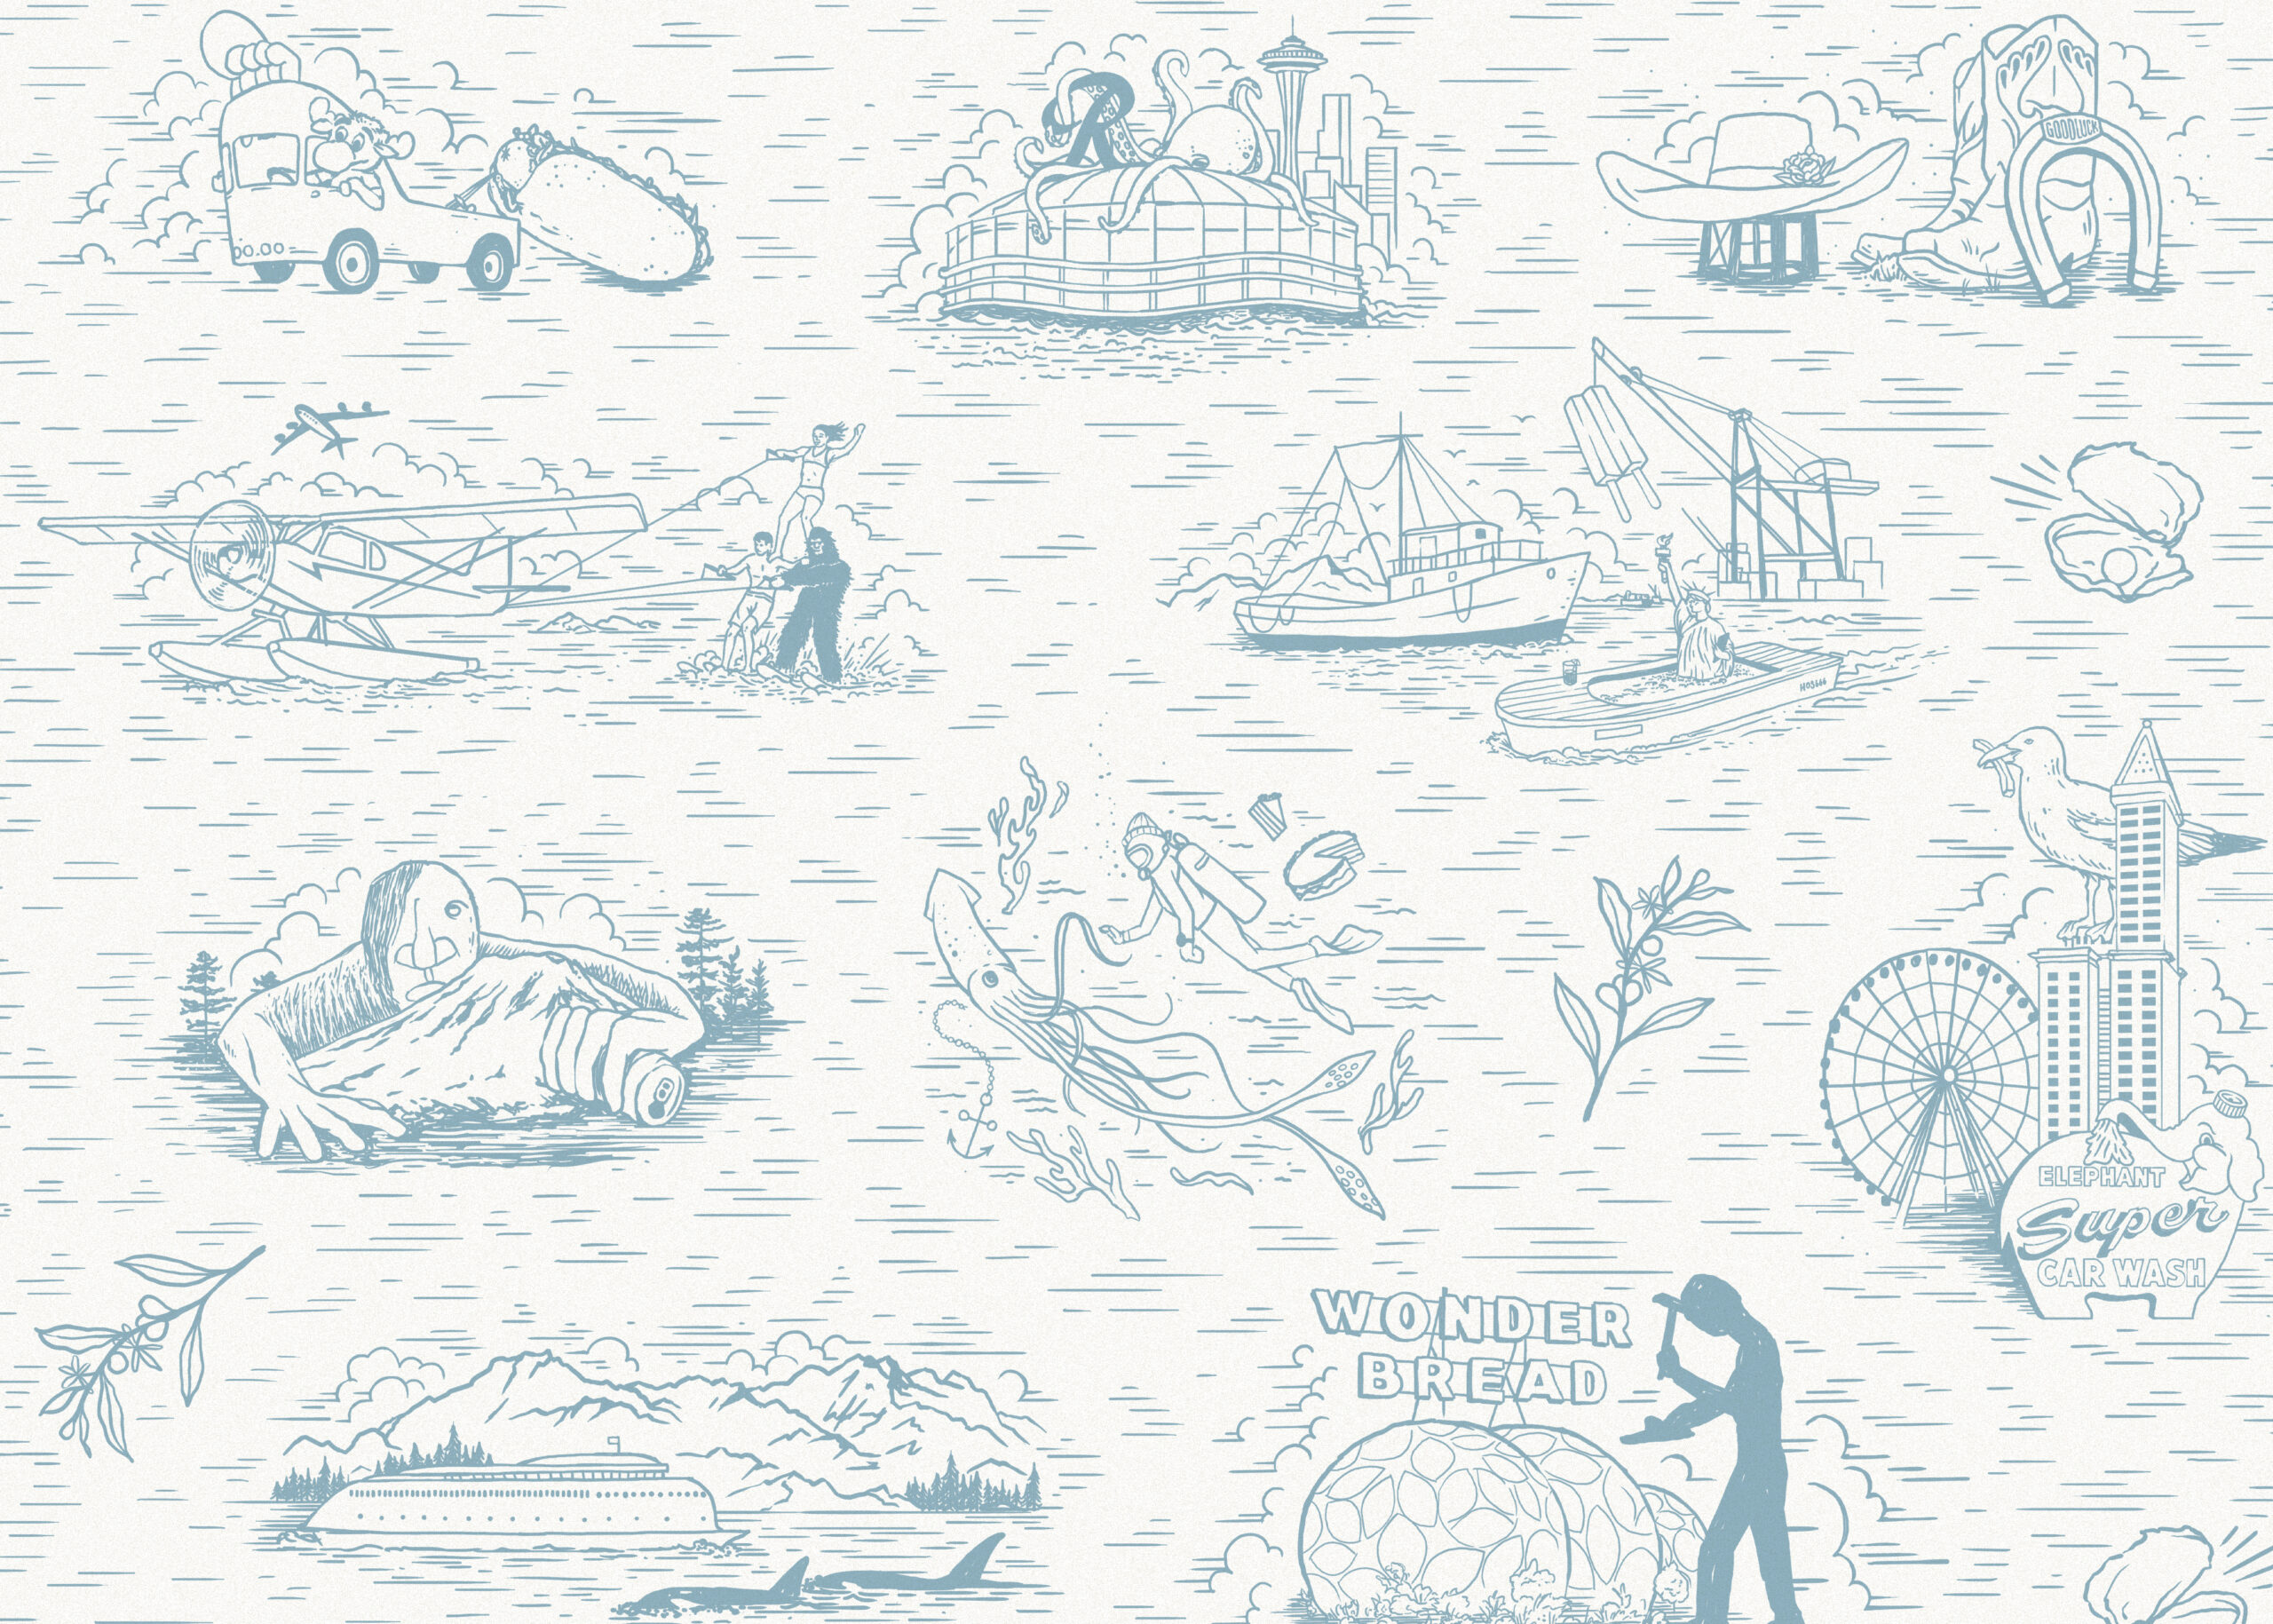 Series of light blue illustrations depicting Seattle attractions